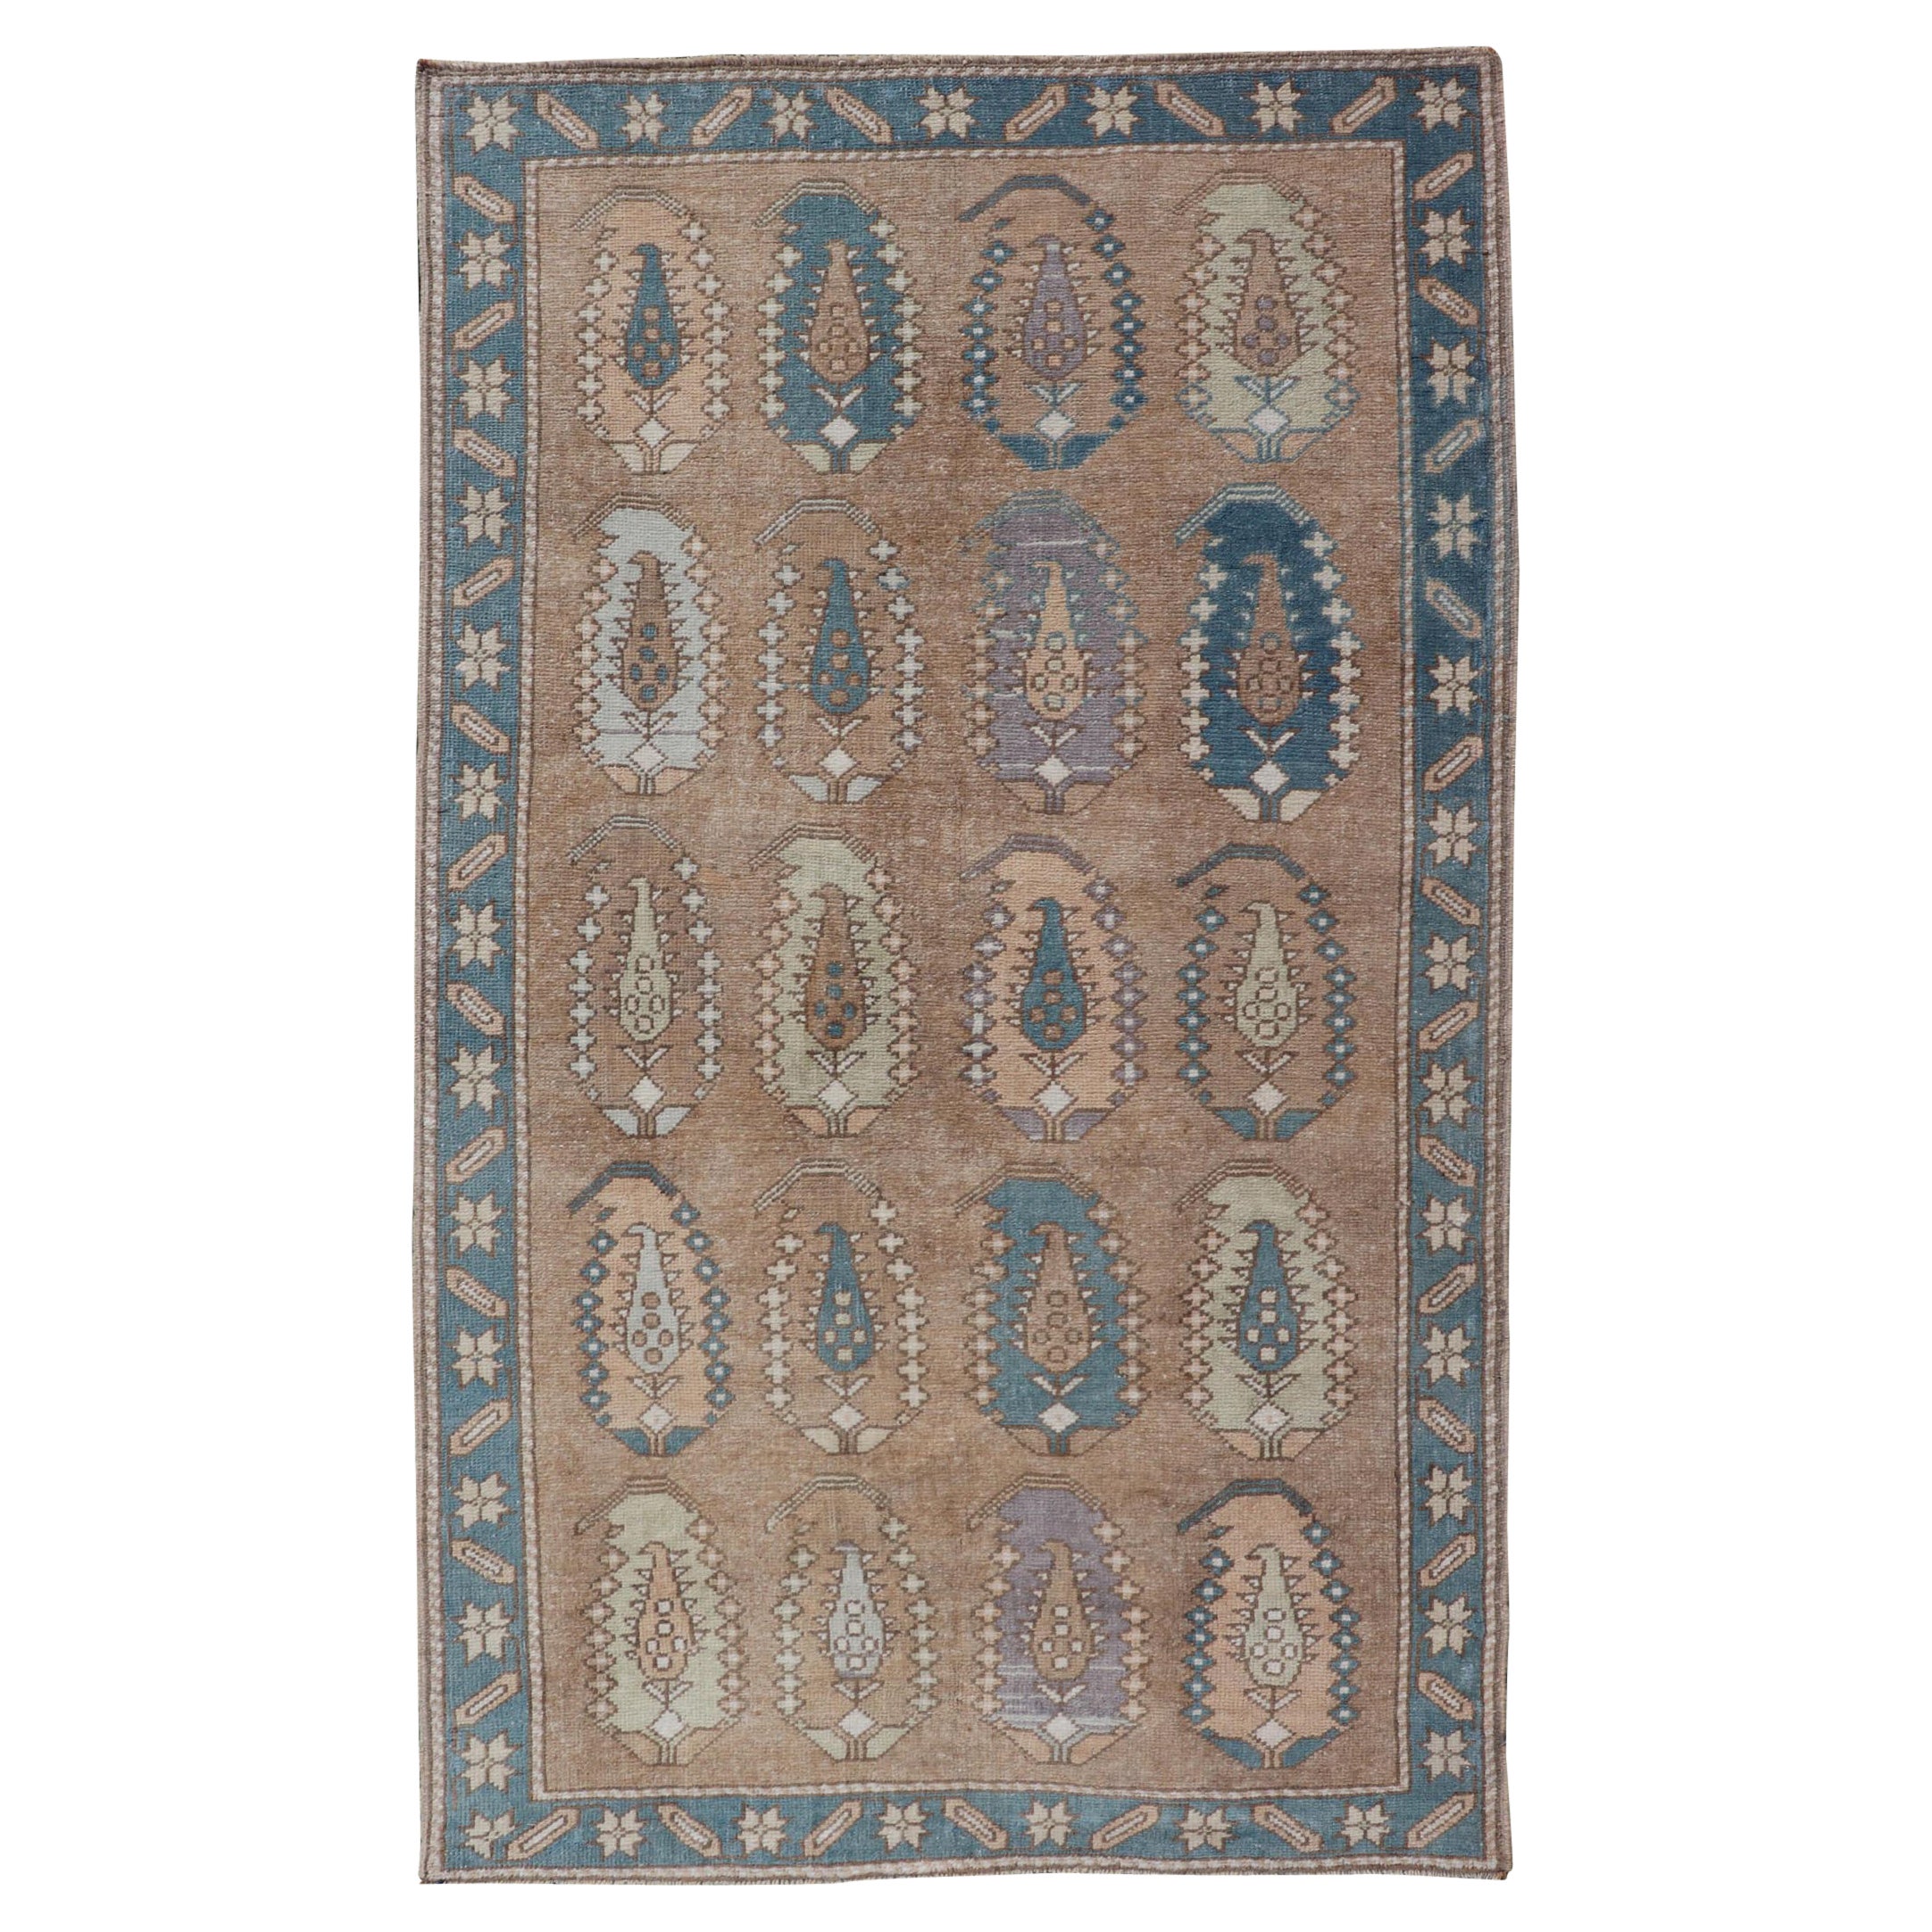 Vintage Turkish Tulu Rug with large Scale Paisley Design in Tans, Brown and Blue